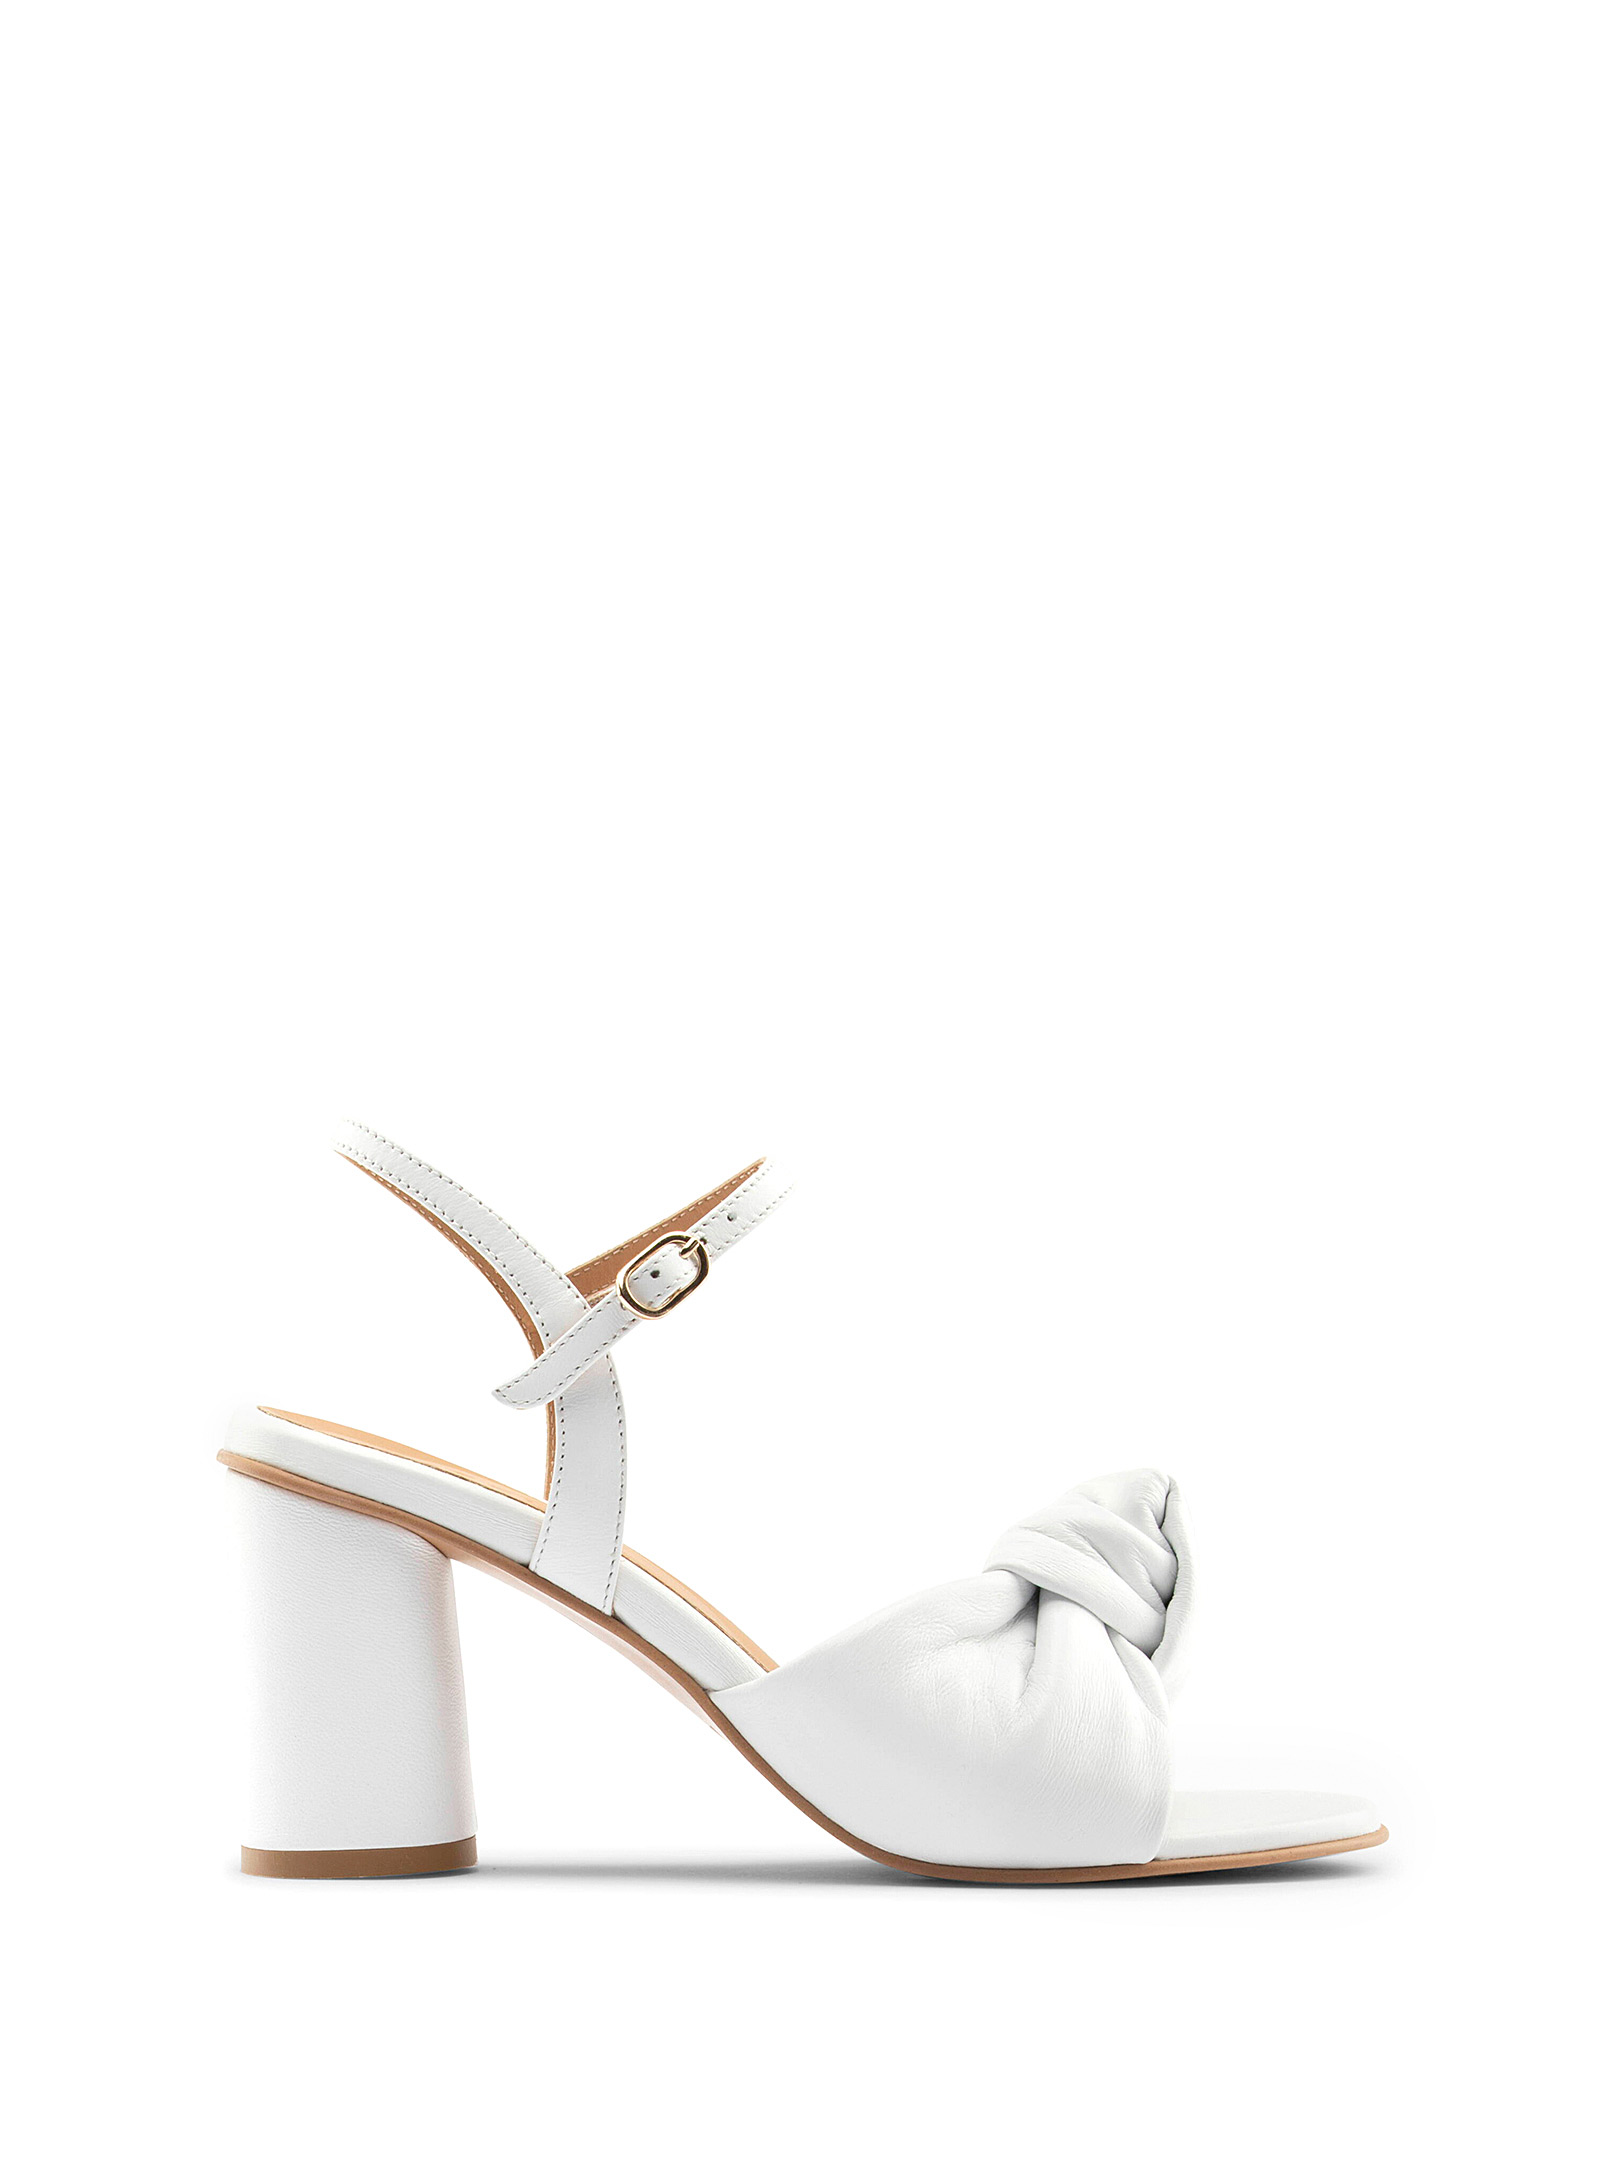 Maguire Noto Block-heel Knotted Sandals Women In White